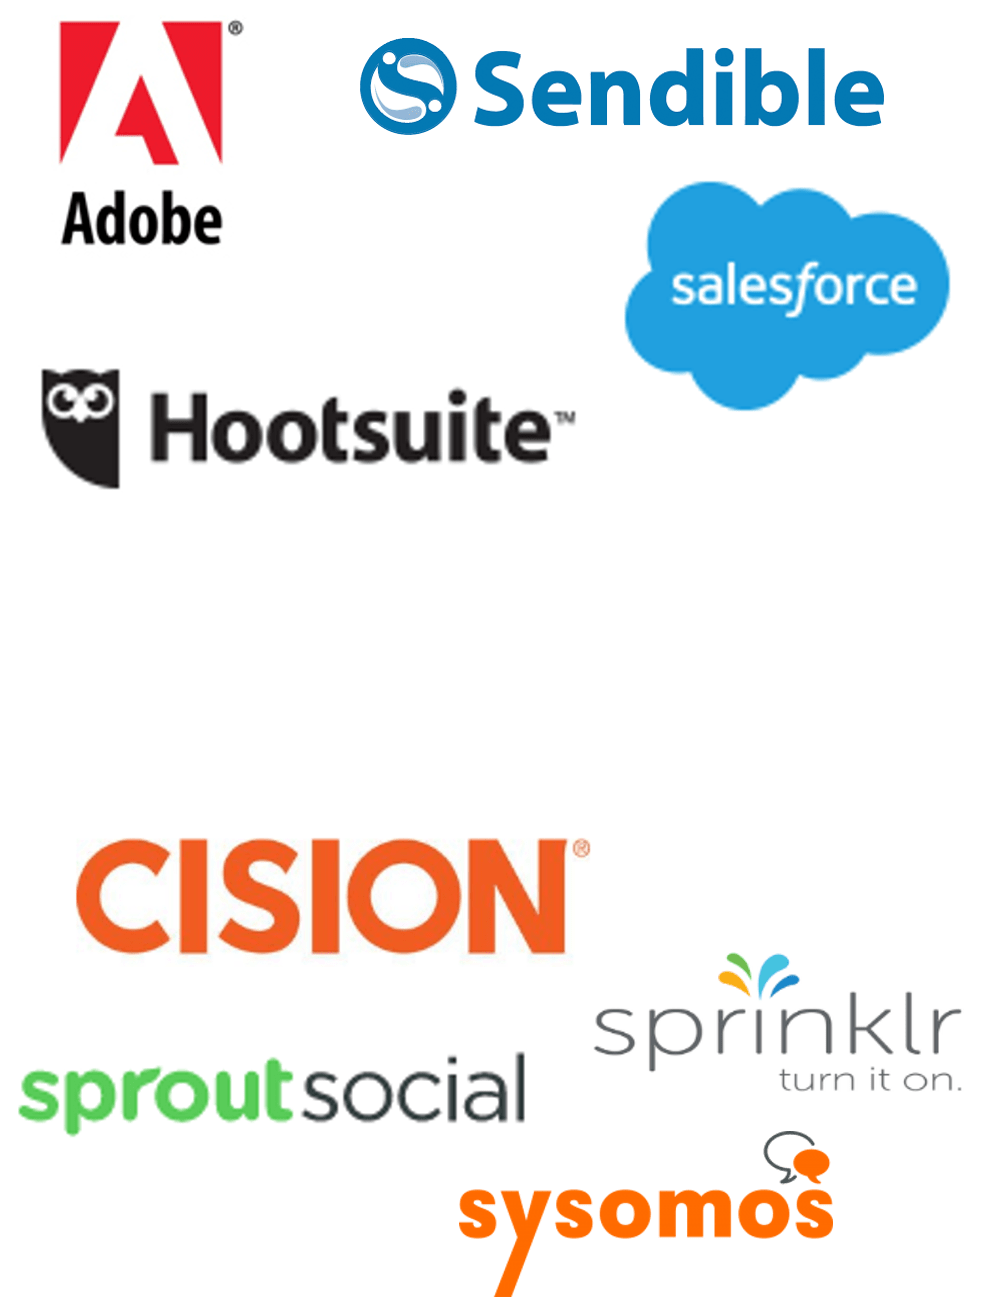 Logos for vendors including Adobe, Hootsuite, CISION, and more.